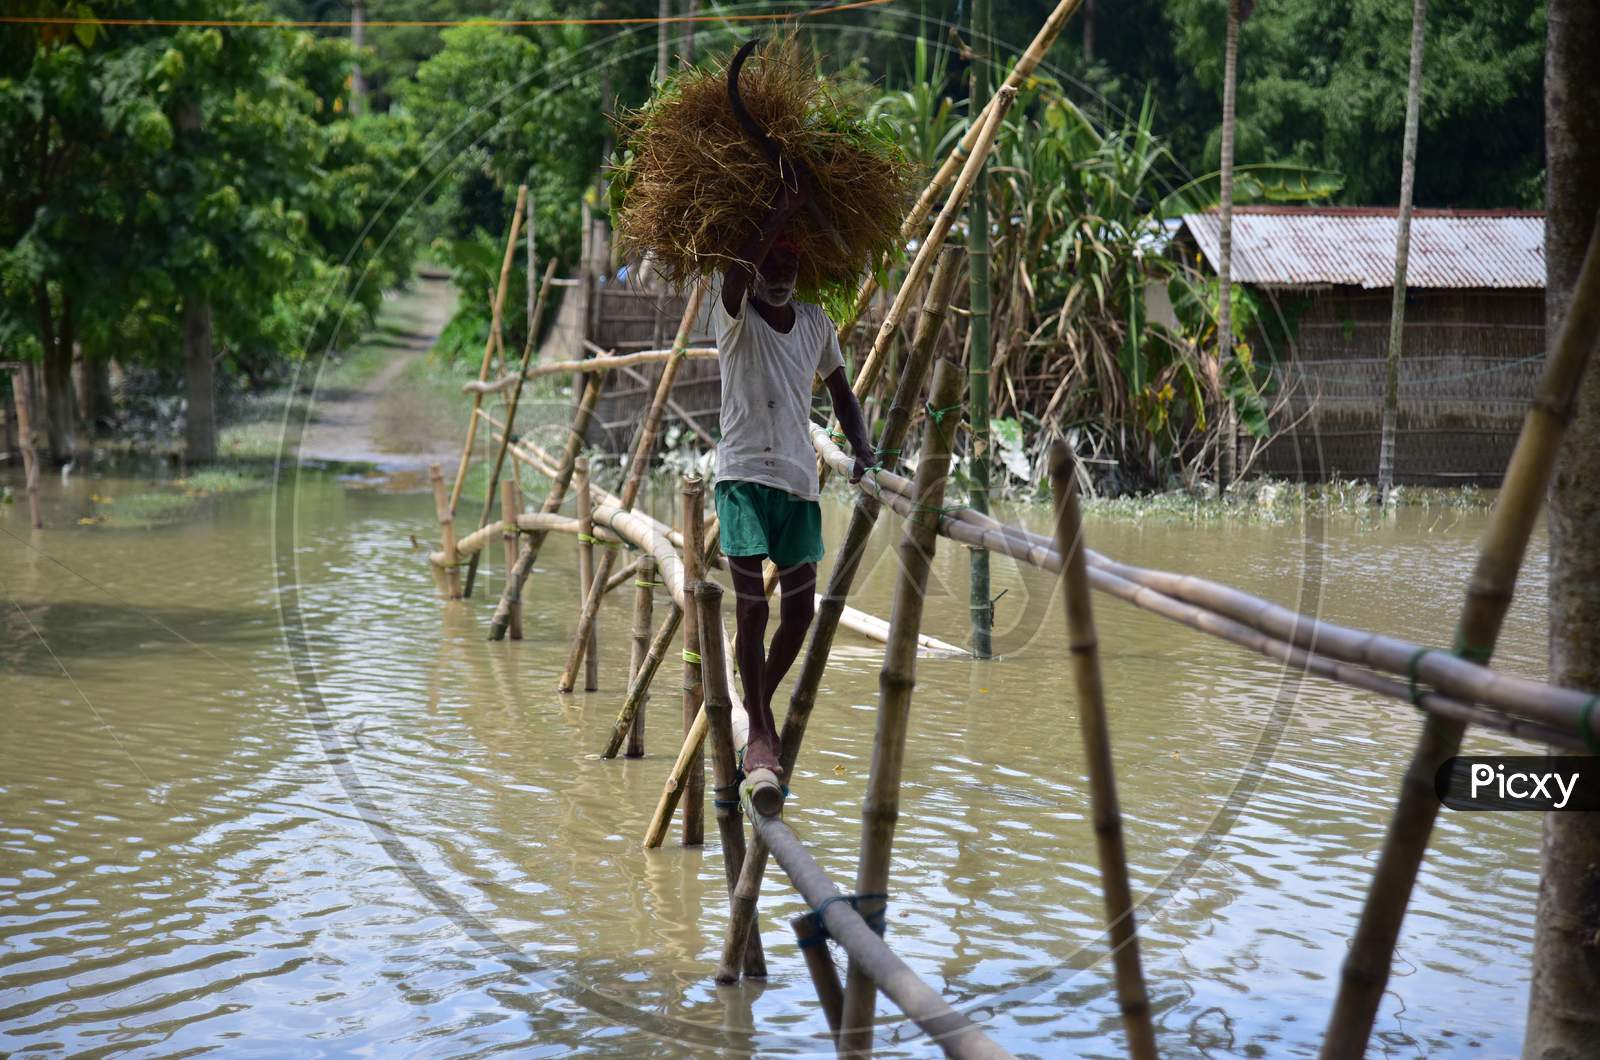 A Villager Uses A Makeshift Bamboo Bridge To Cross A Flooded Area At The Flood-Affected Laokhowa Wildlife Sanctuary In Nagaon District Of Assam On July 25,2020.